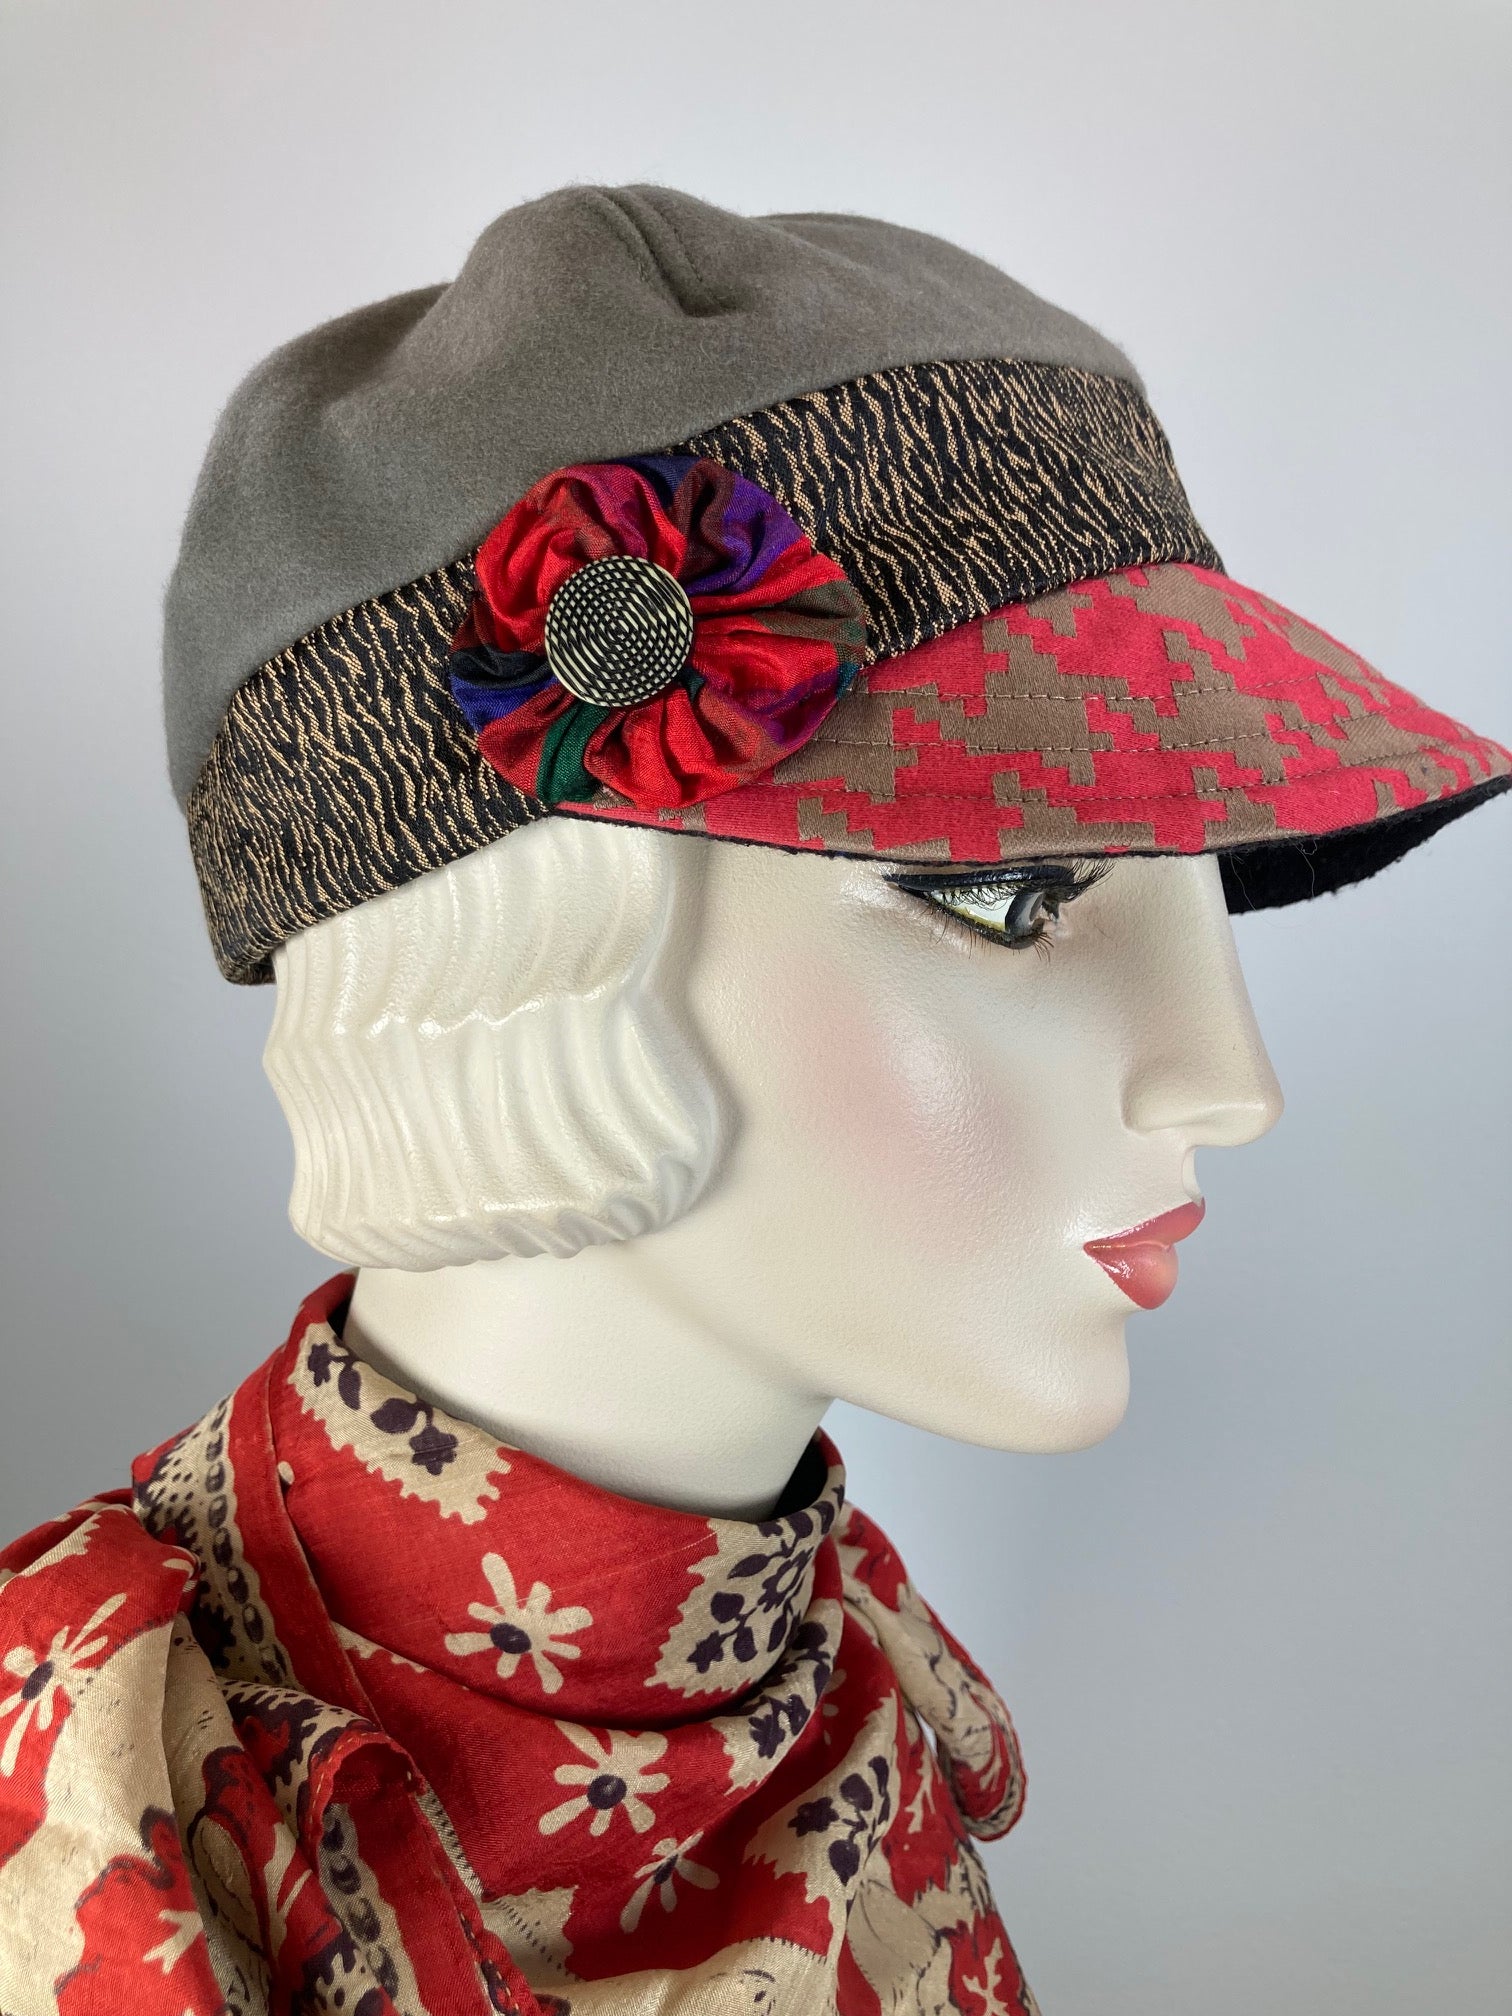 Women's Hat Putty Gray. Ladies colorful winter hat baseball style. Newsboy hat Gray Red. Warm fabric casual travel hat.